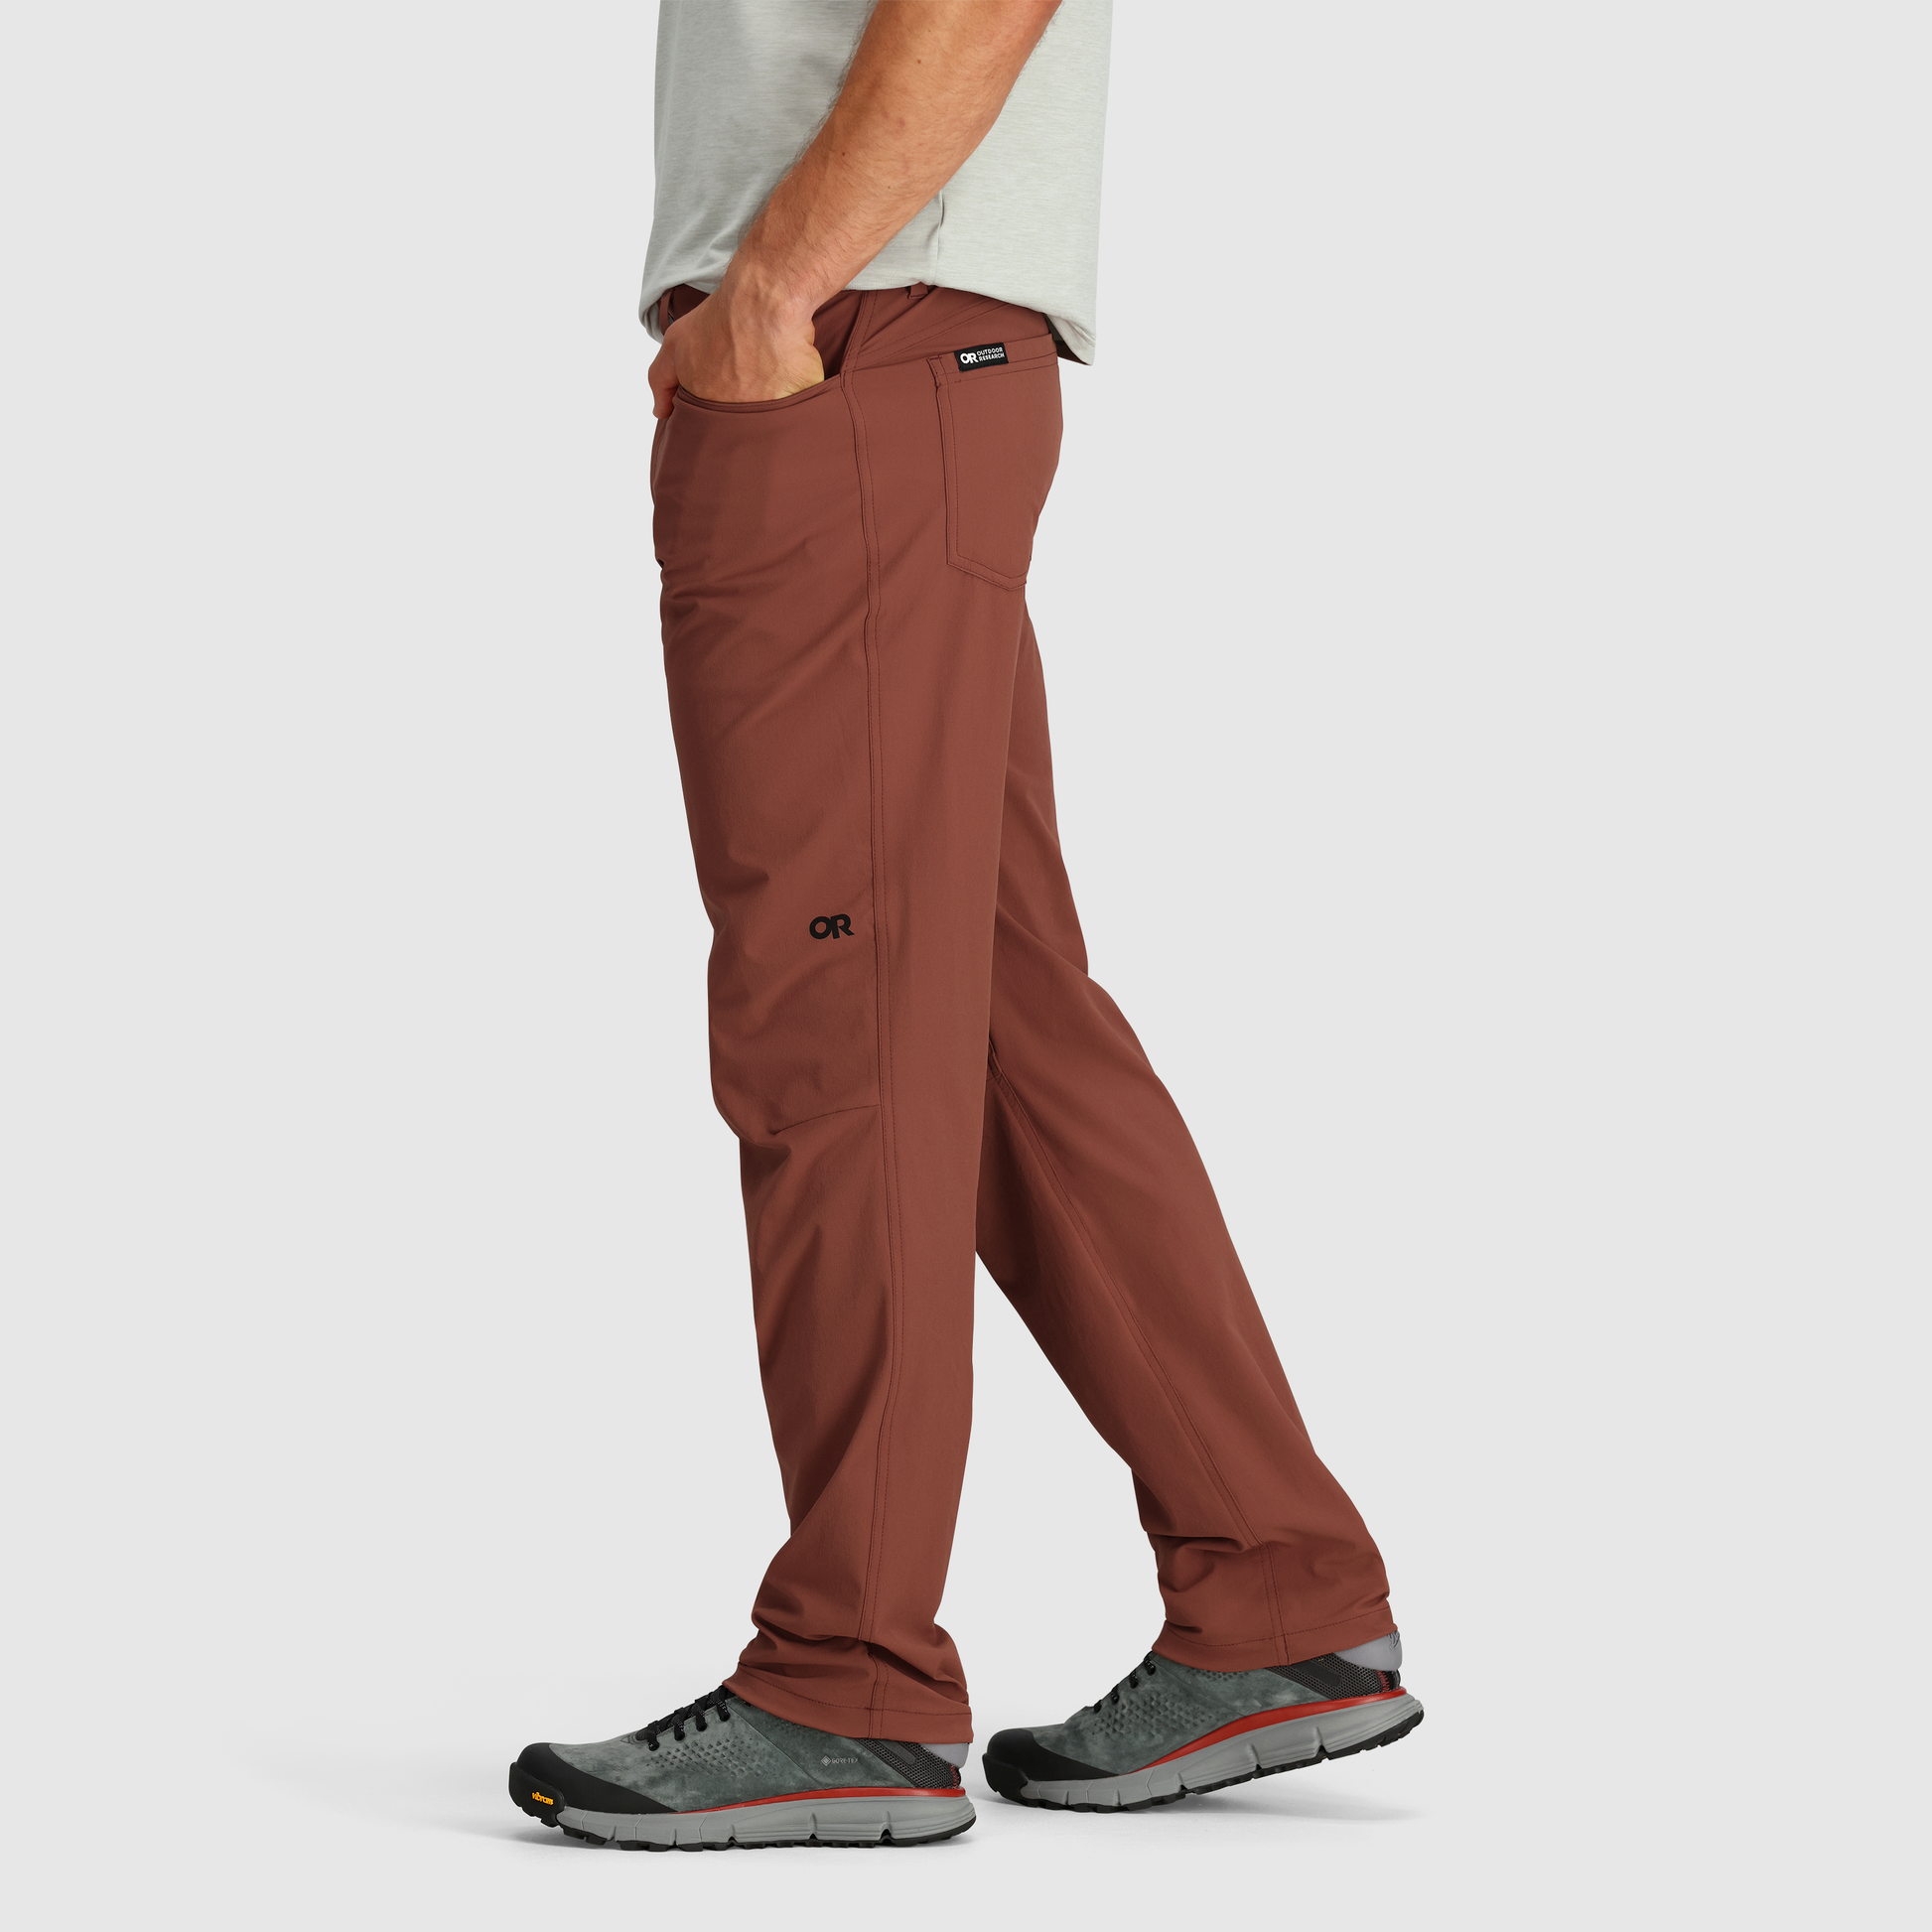 Outdoor Research M's Ferrosi Transit Pants - 30 Inseam - Quest Outdoors